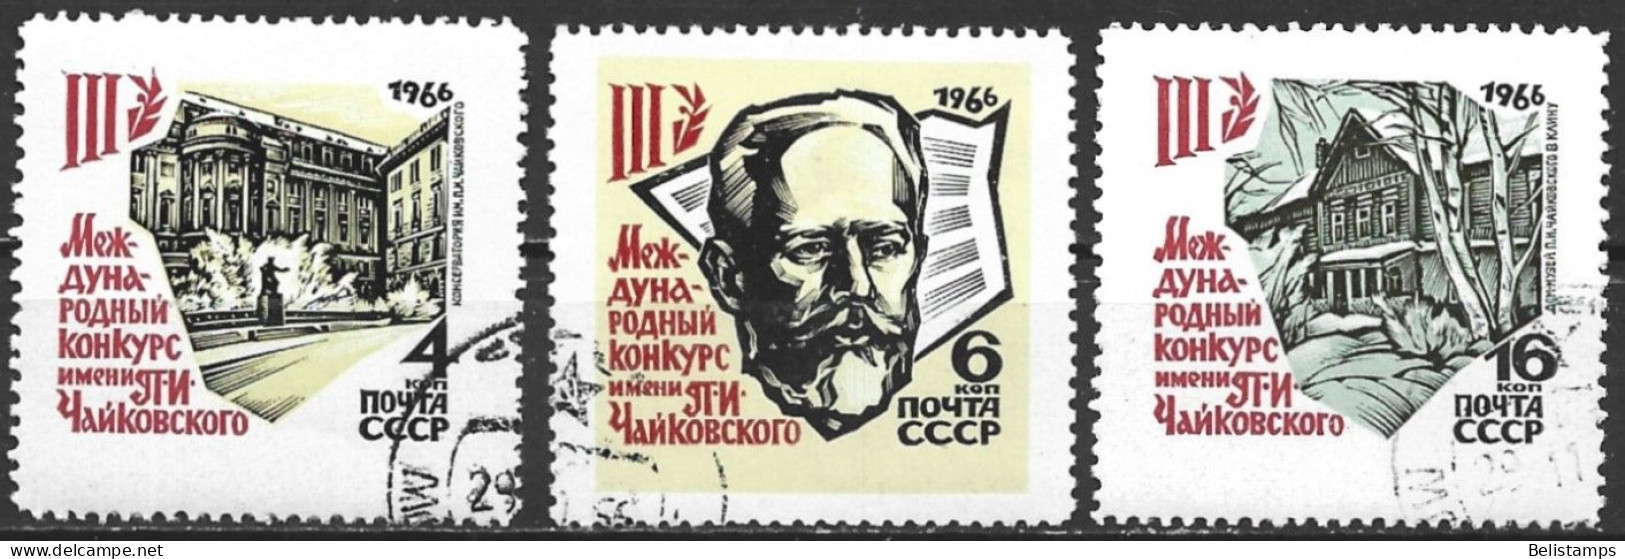 Russia 1966. Scott #3207-9 (U) Third International Tchaikovsky Contest, Moscow  (Complete Set) - Used Stamps